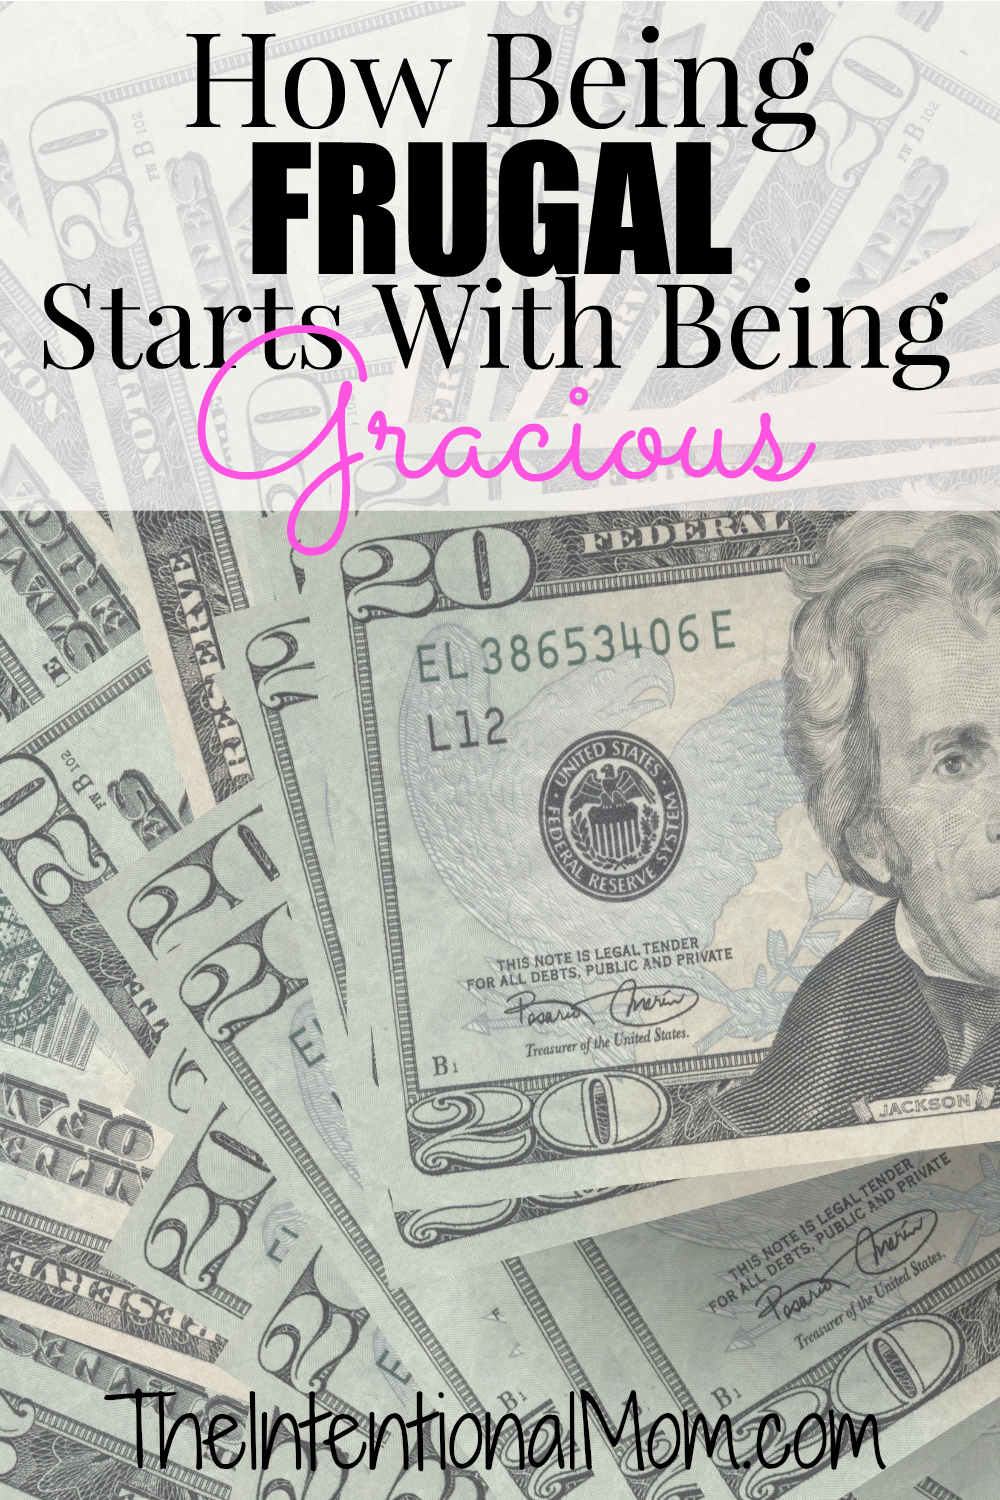 How Being Frugal Starts With Being Gracious